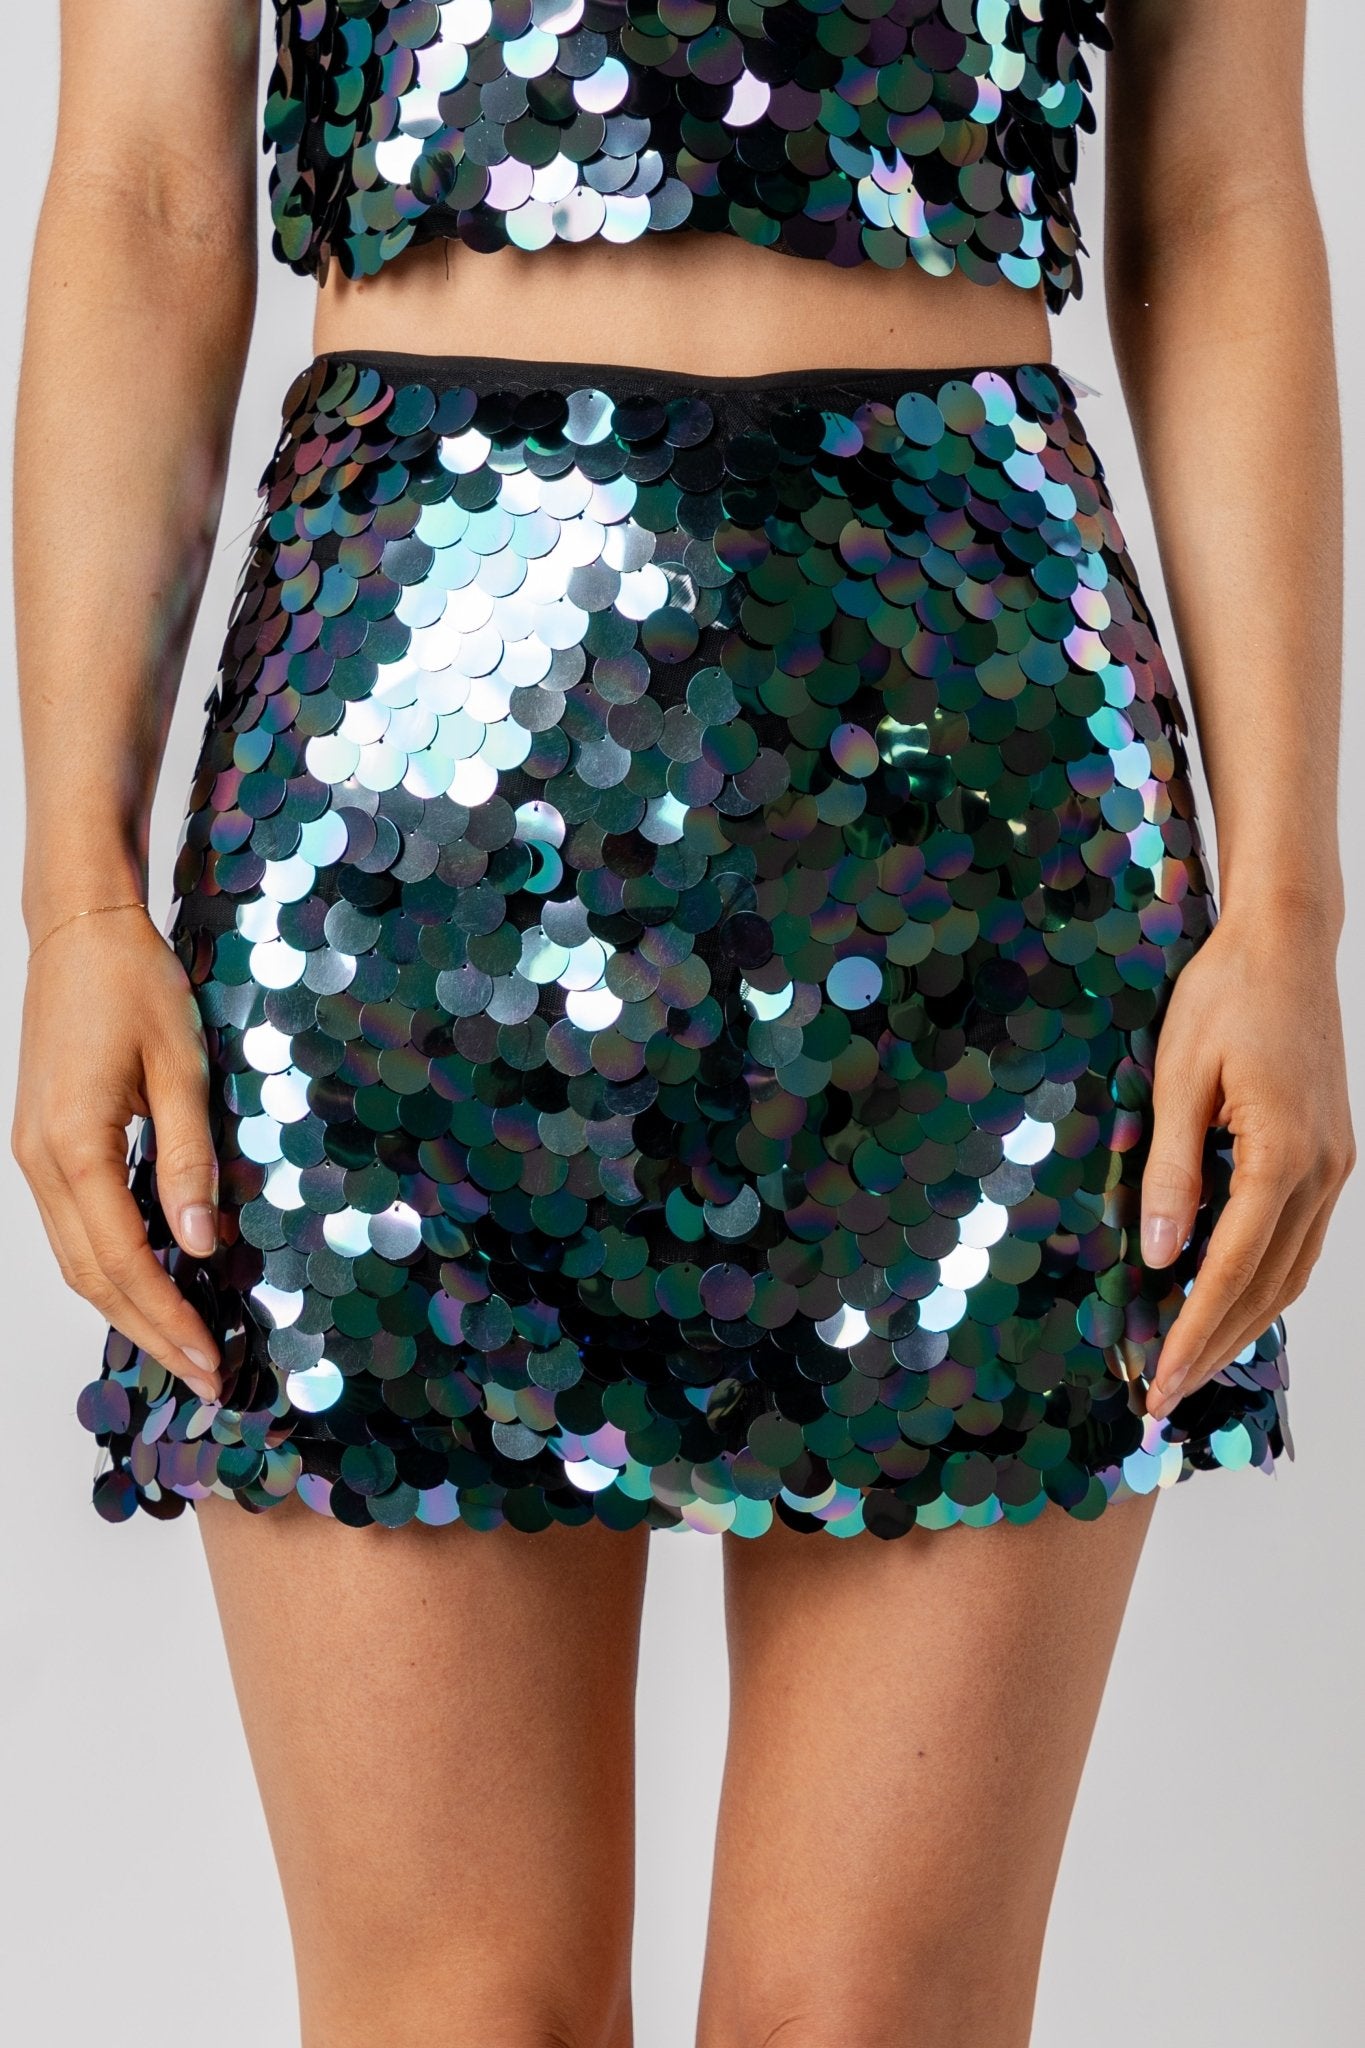 Sequin mini skirt black - Trendy New Year's Eve Dresses, Skirts, Kimonos and Sequins at Lush Fashion Lounge Boutique in Oklahoma City